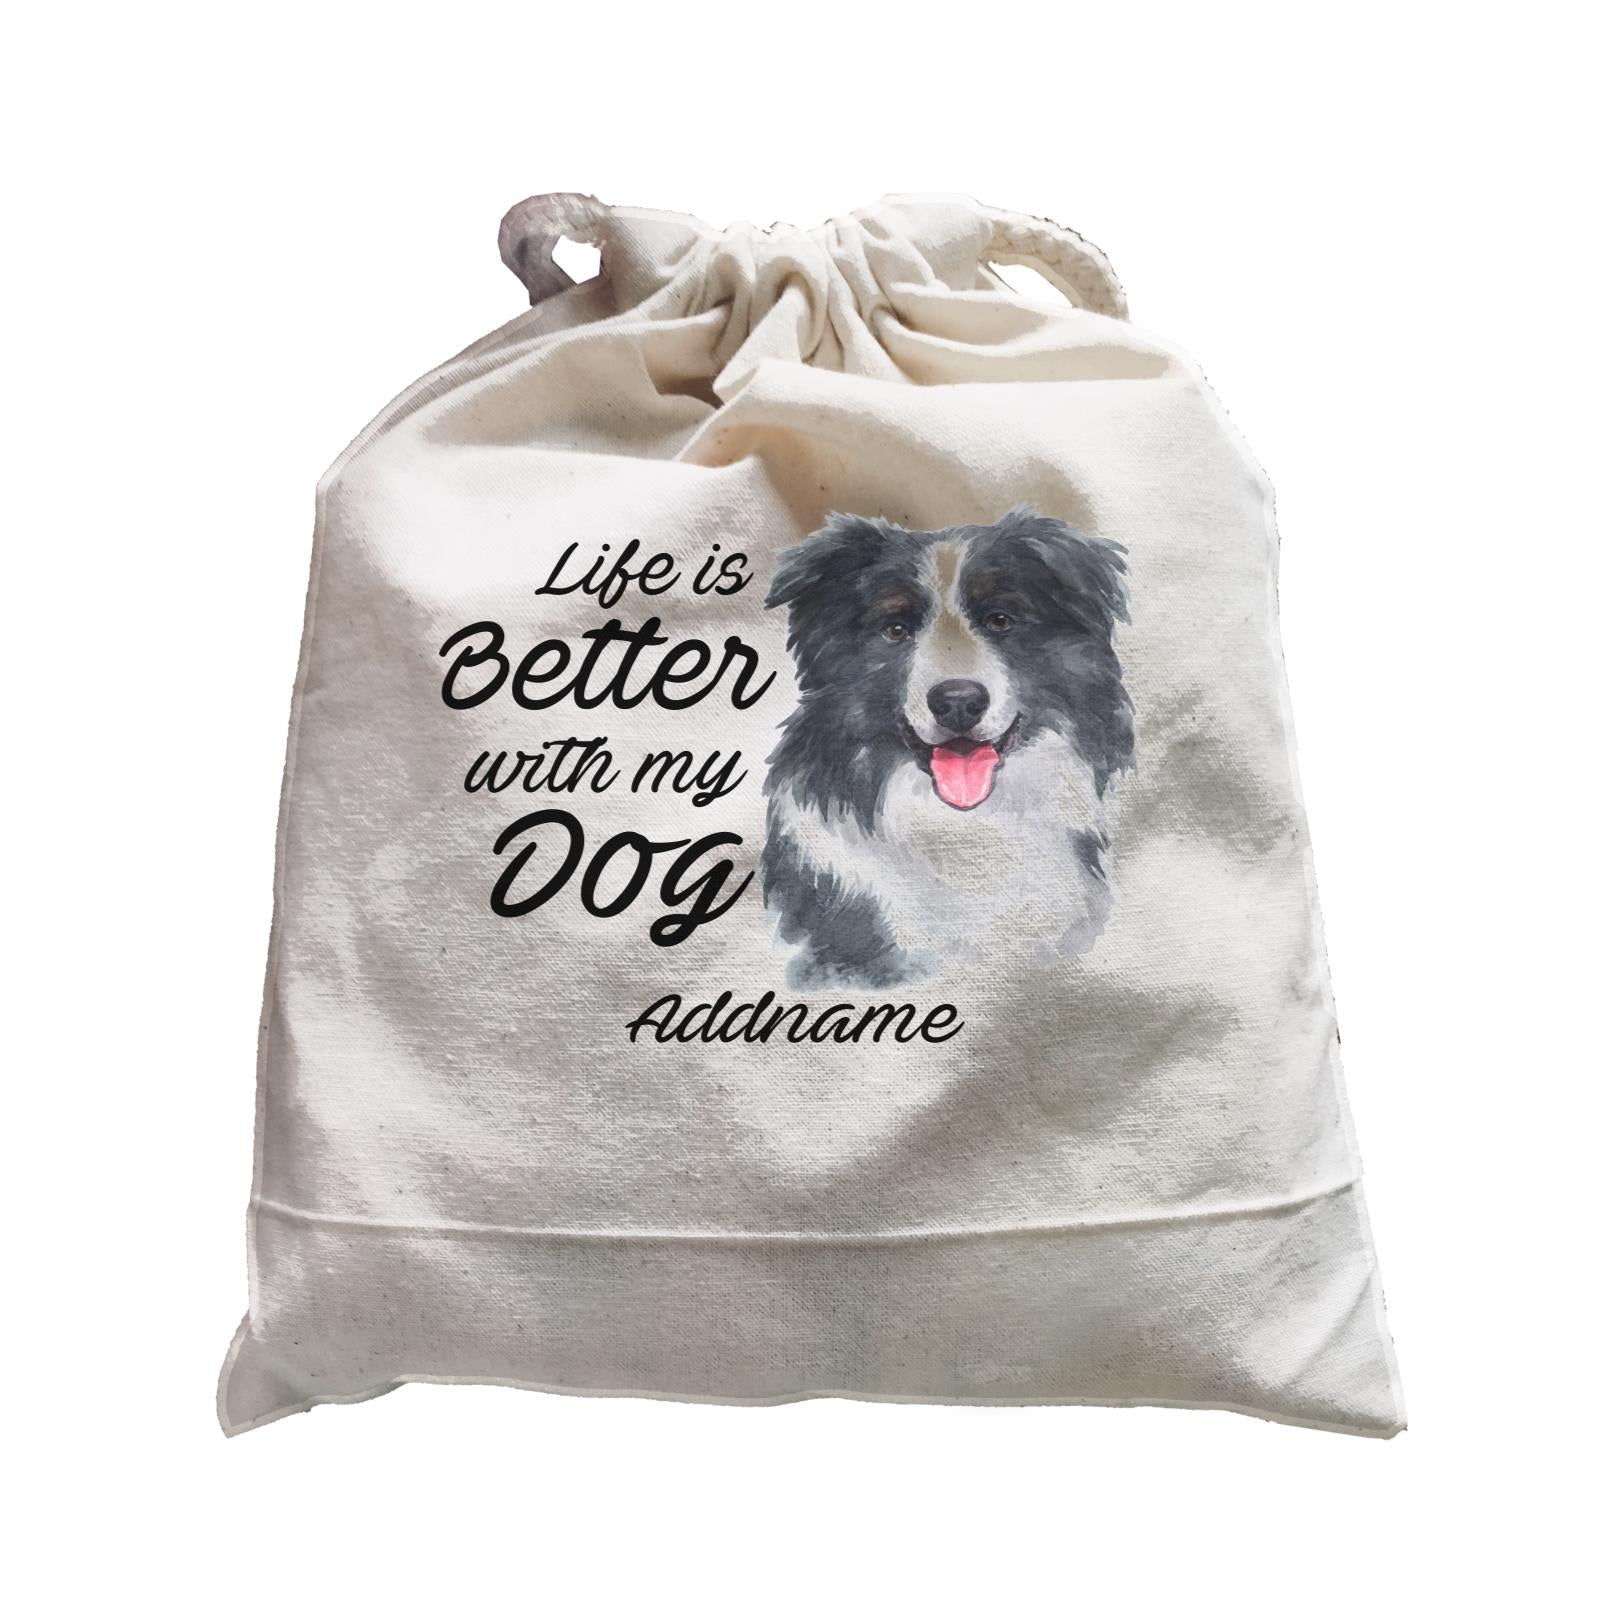 Watercolor Life is Better With My Dog Border Collie Addname Satchel